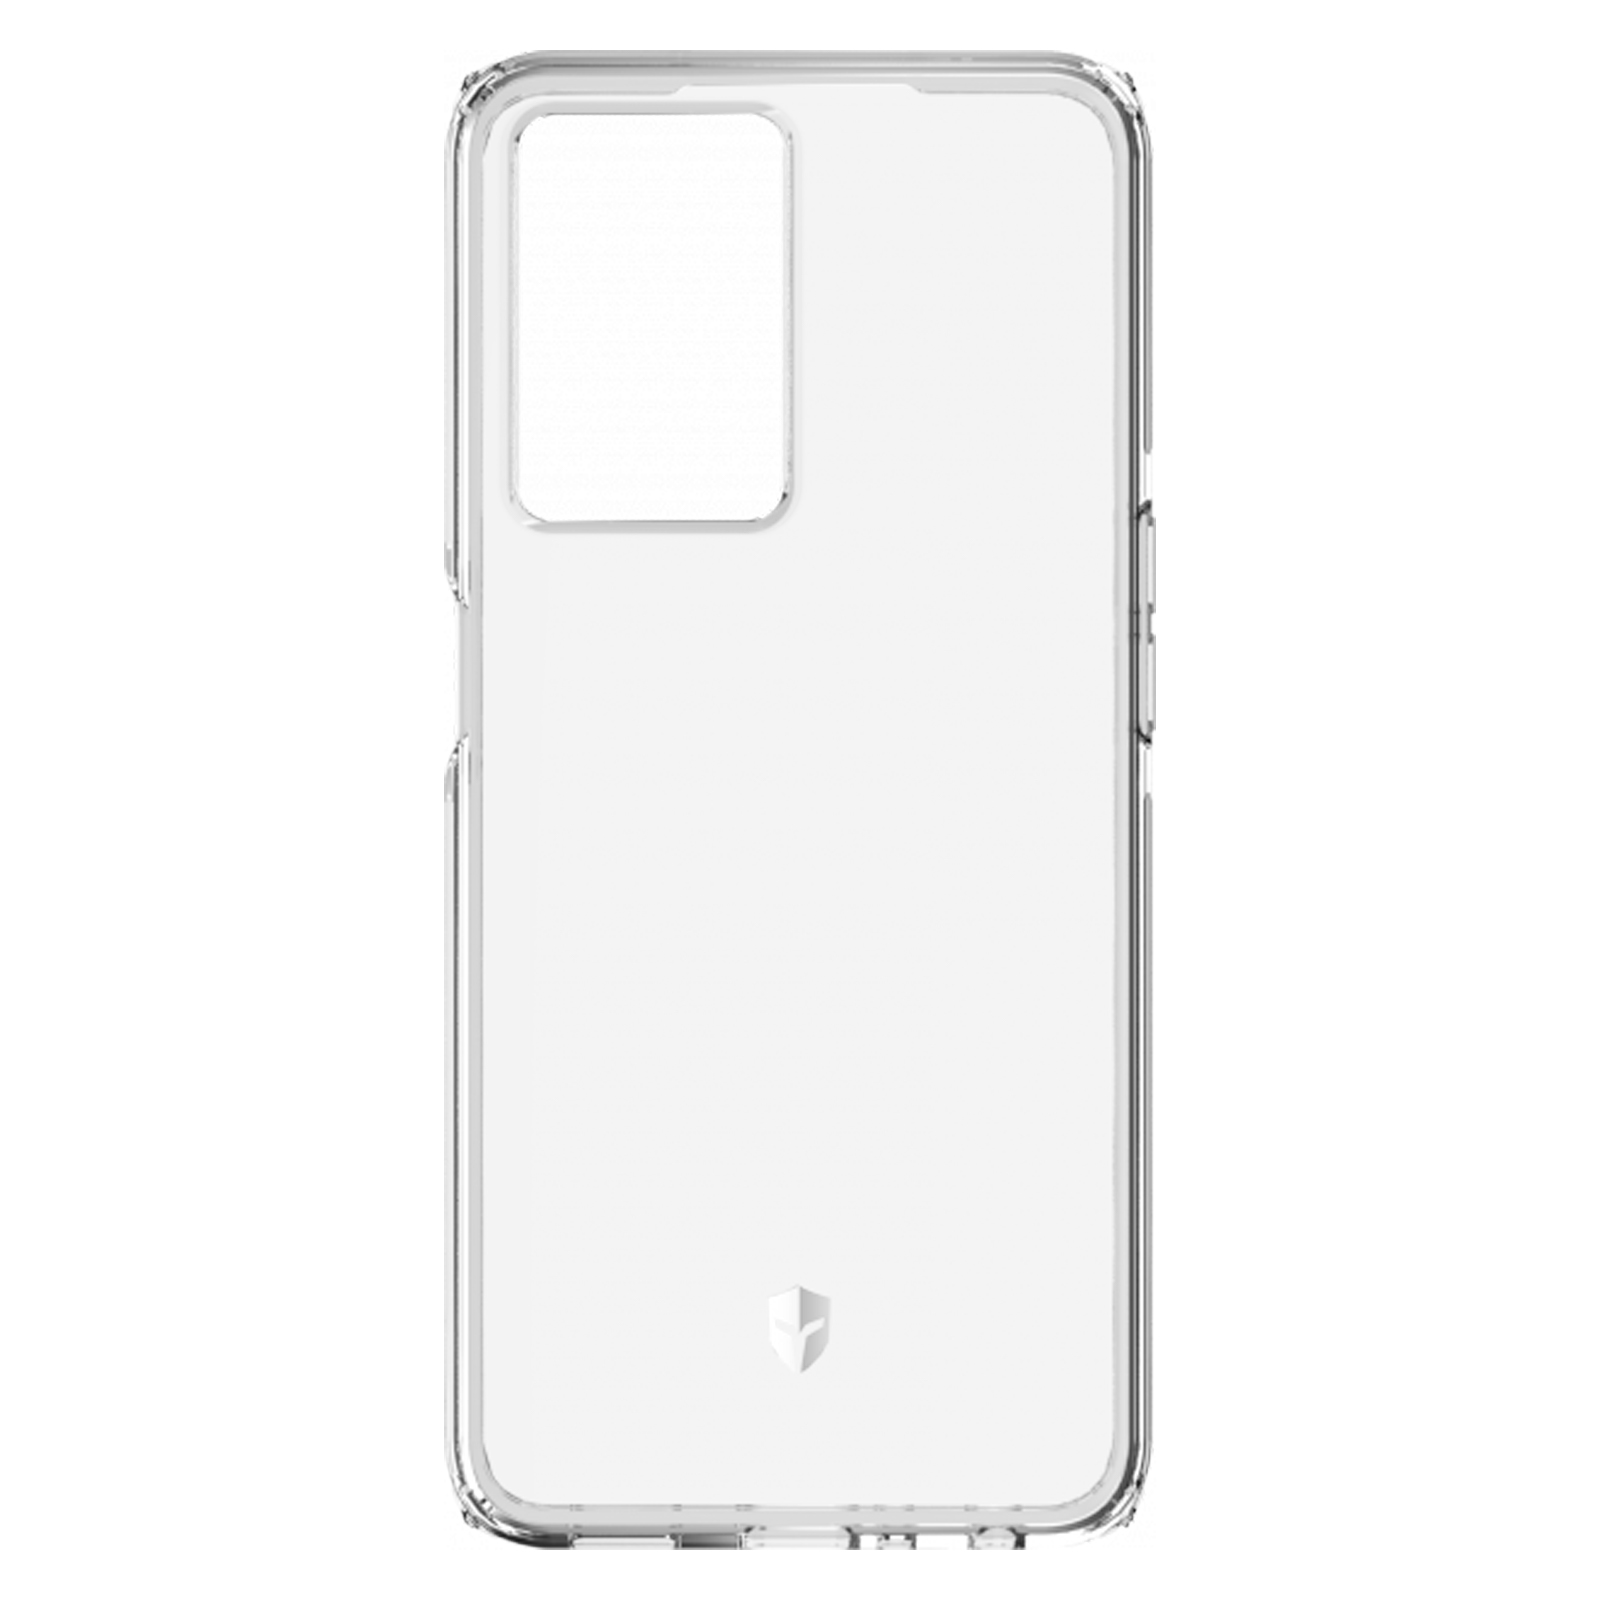 FORCE CASE Feel Handyhülle Series, Oppo Backcover, Transparent A57s, Oppo